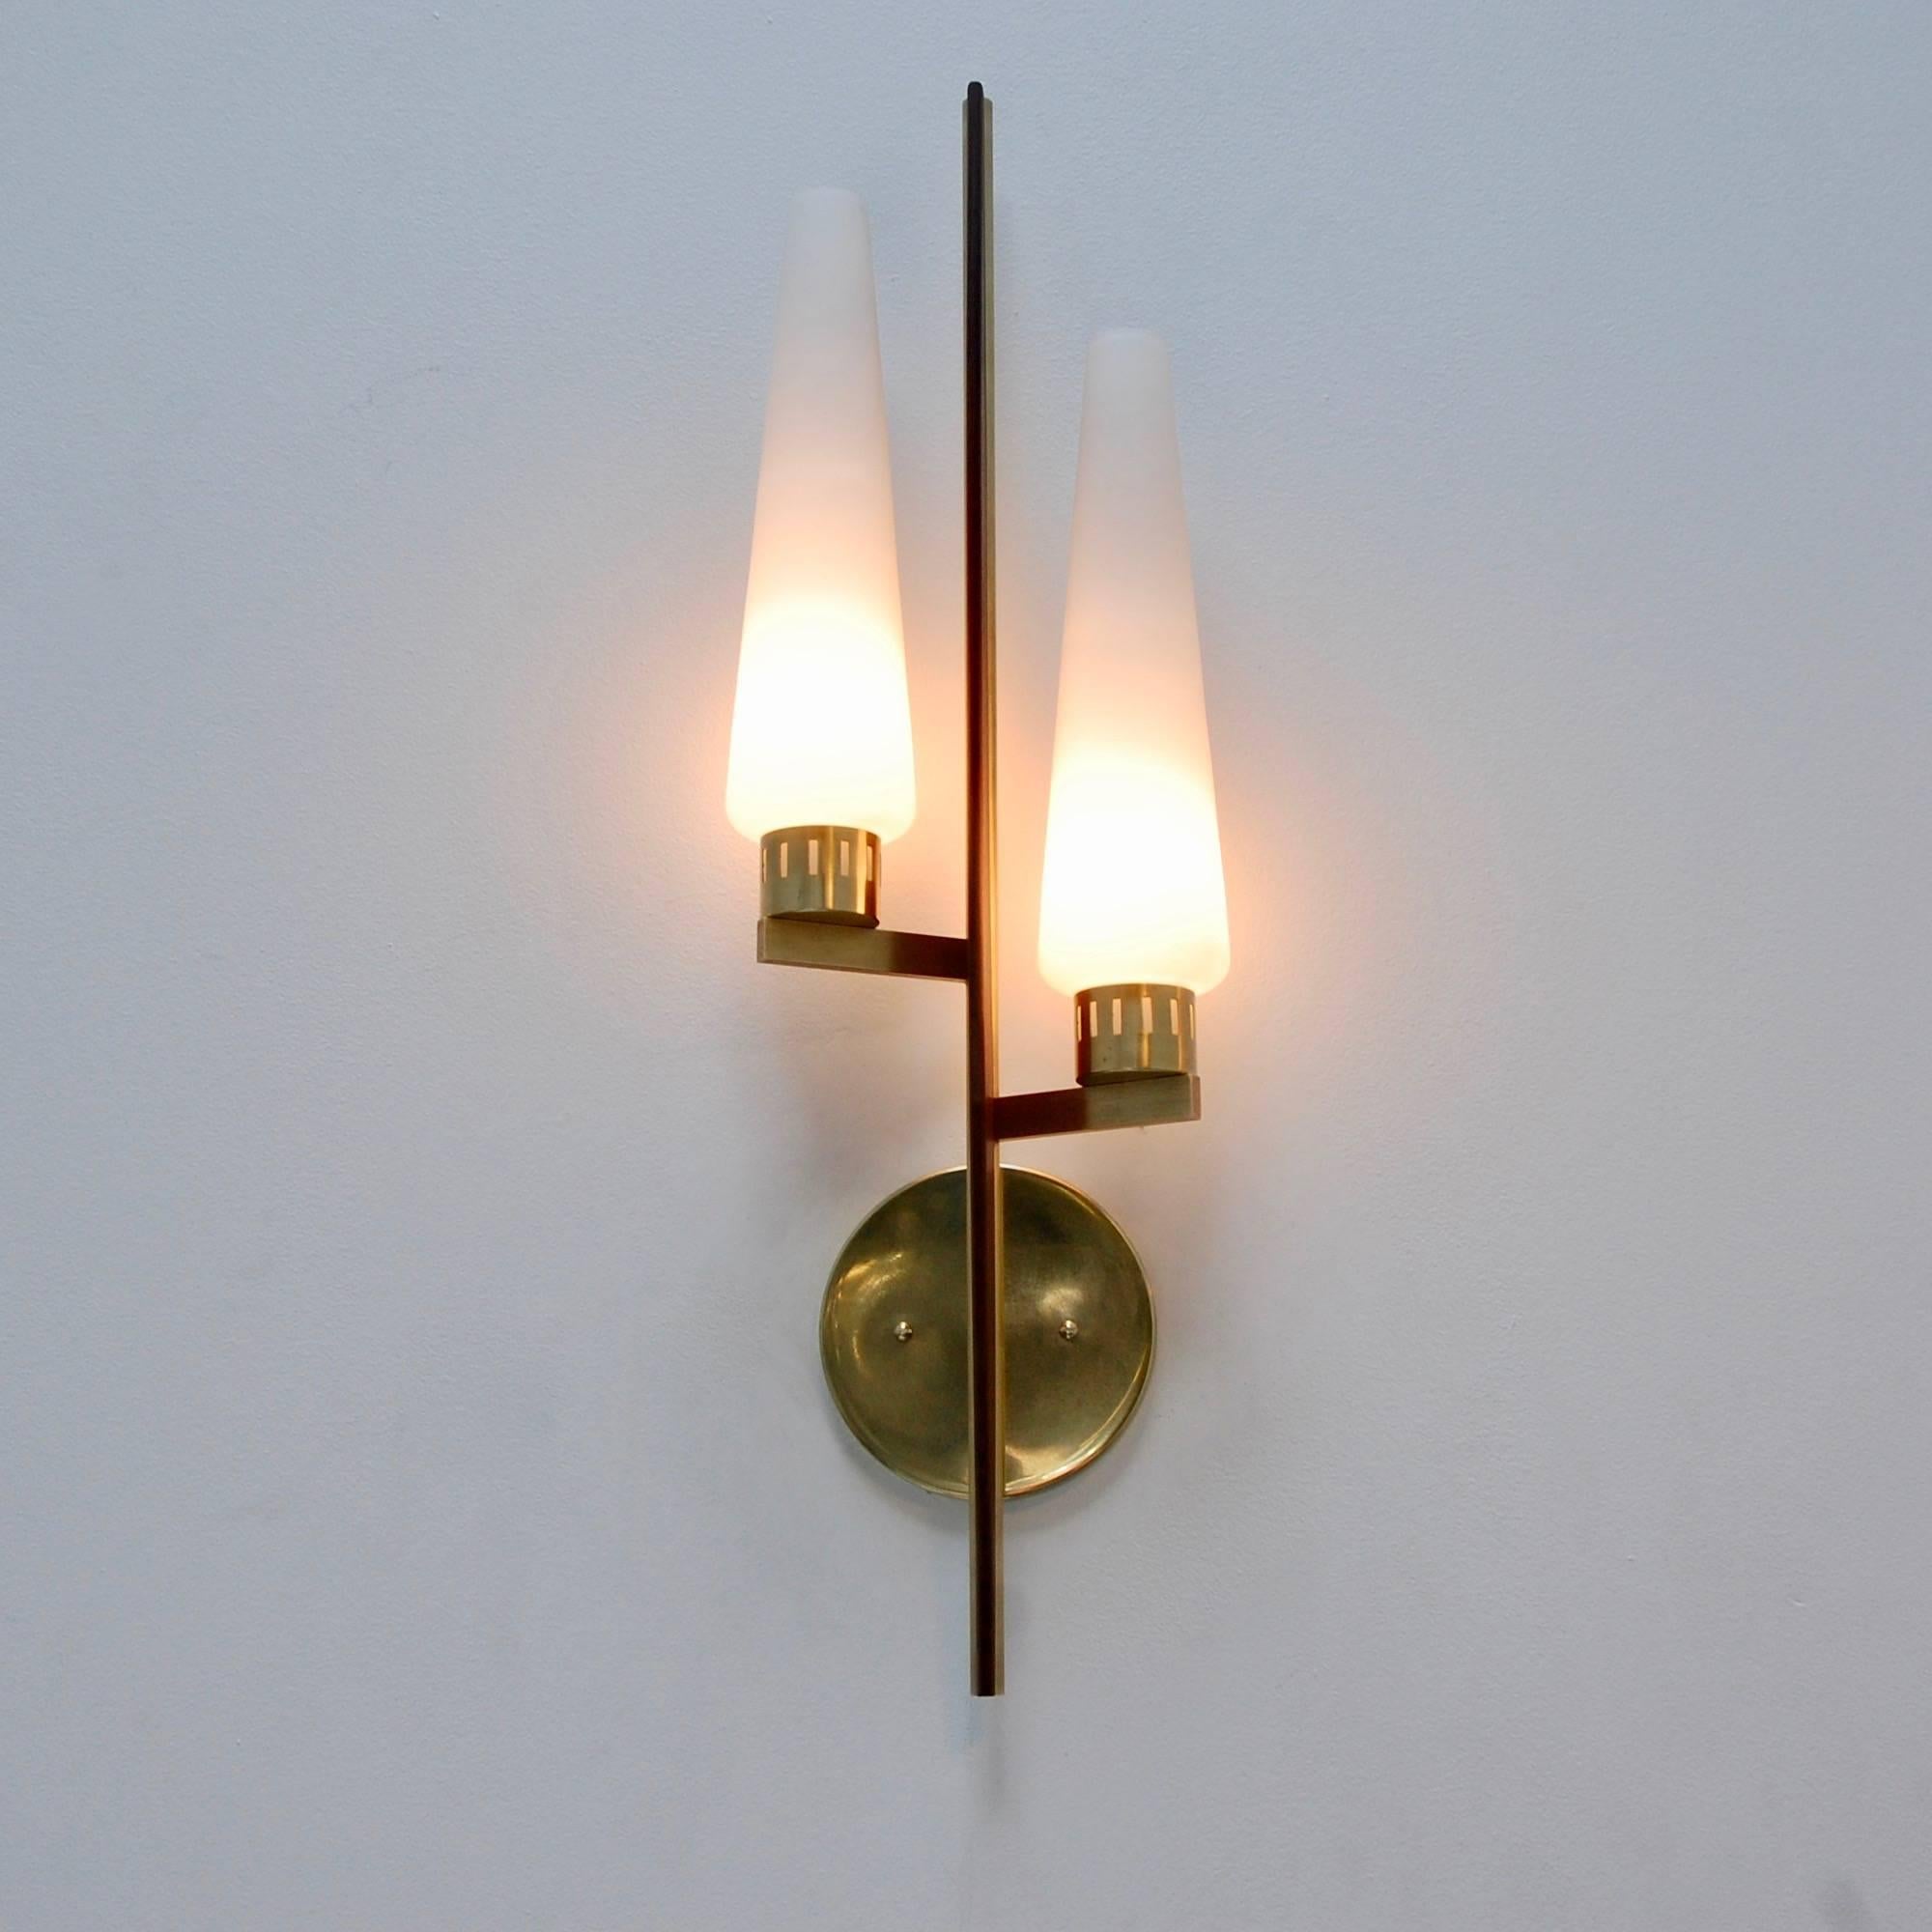 A pair of tall Classic 1950s teak sconces from Italy. Two glass shades per fixture. Partially restored, patina un-lacquered brass, teak wood and glass. Single E12 based socket per shade. Two per sconce. Maximum wattage 75 watts per shade. Currently